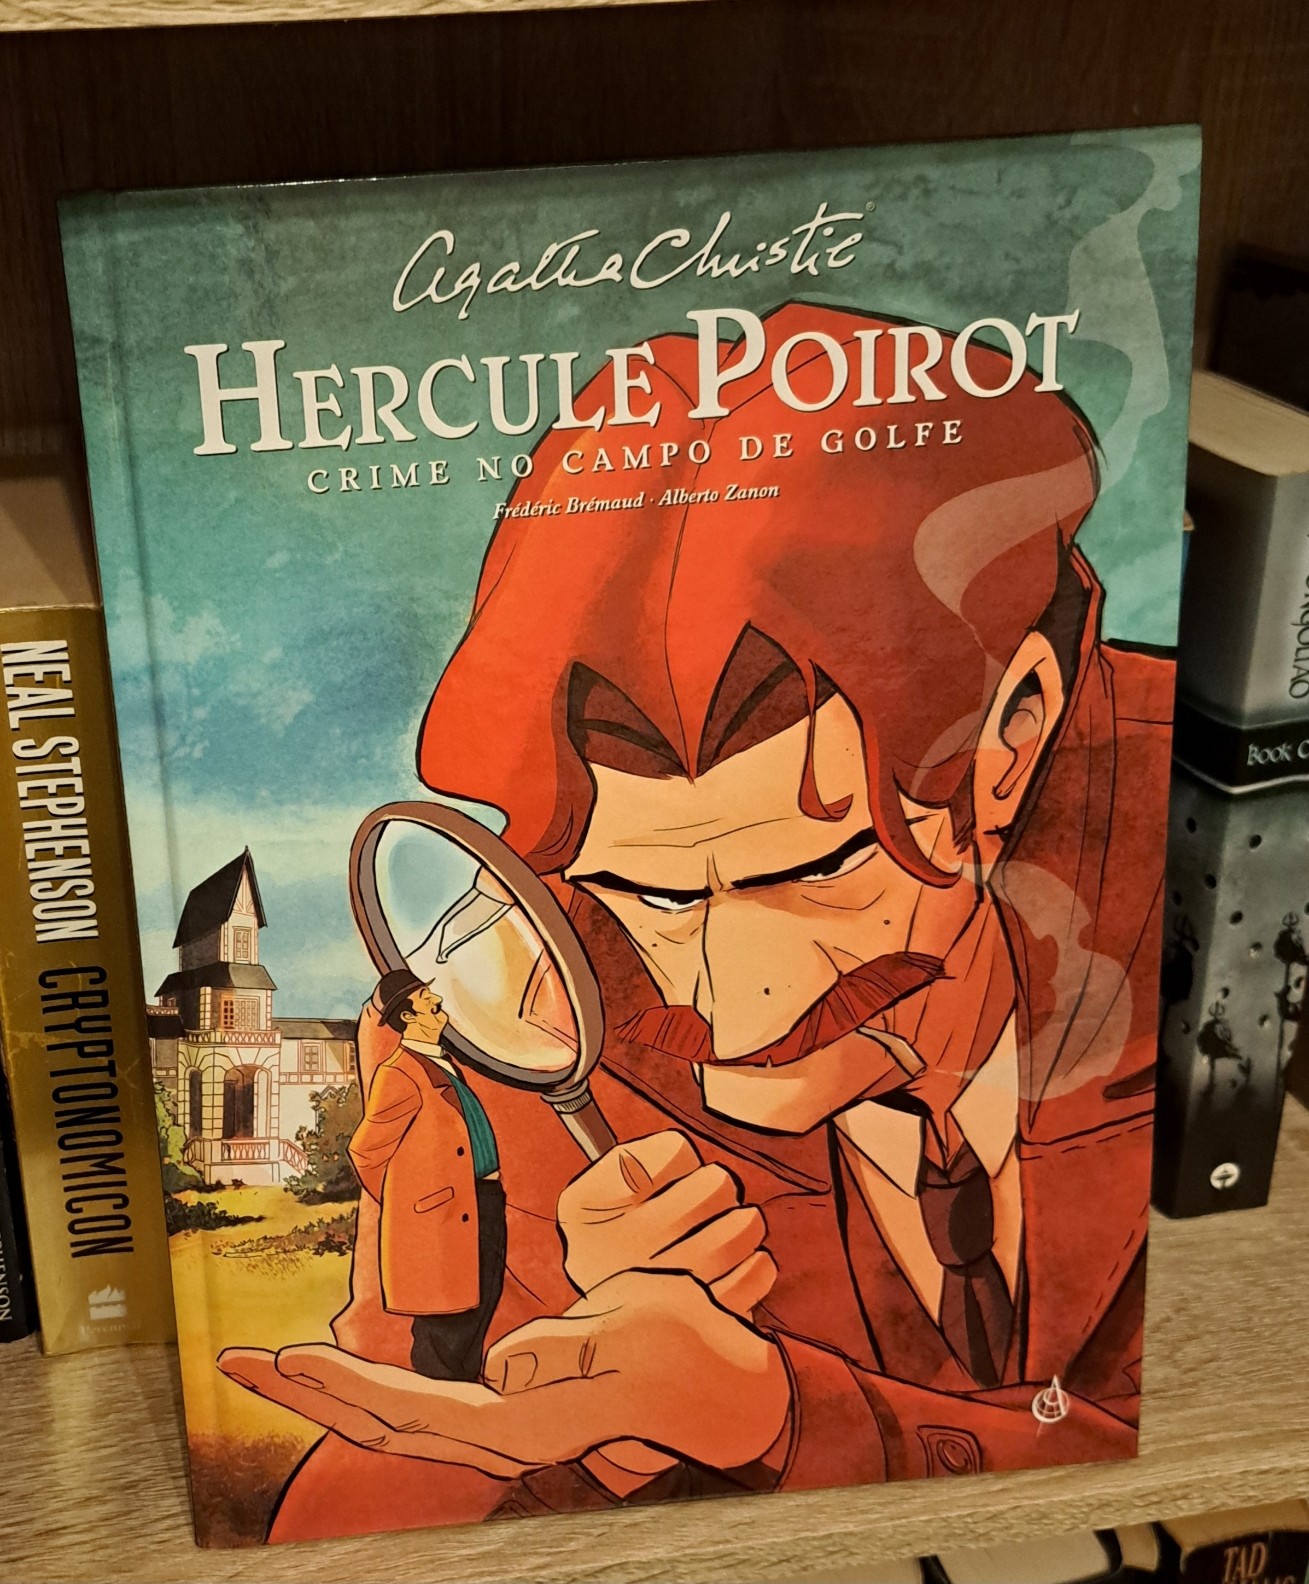 In the cover we can see that the title is "Crime no campo de golfe", as this is the Portuguese edition on this comics adaptation